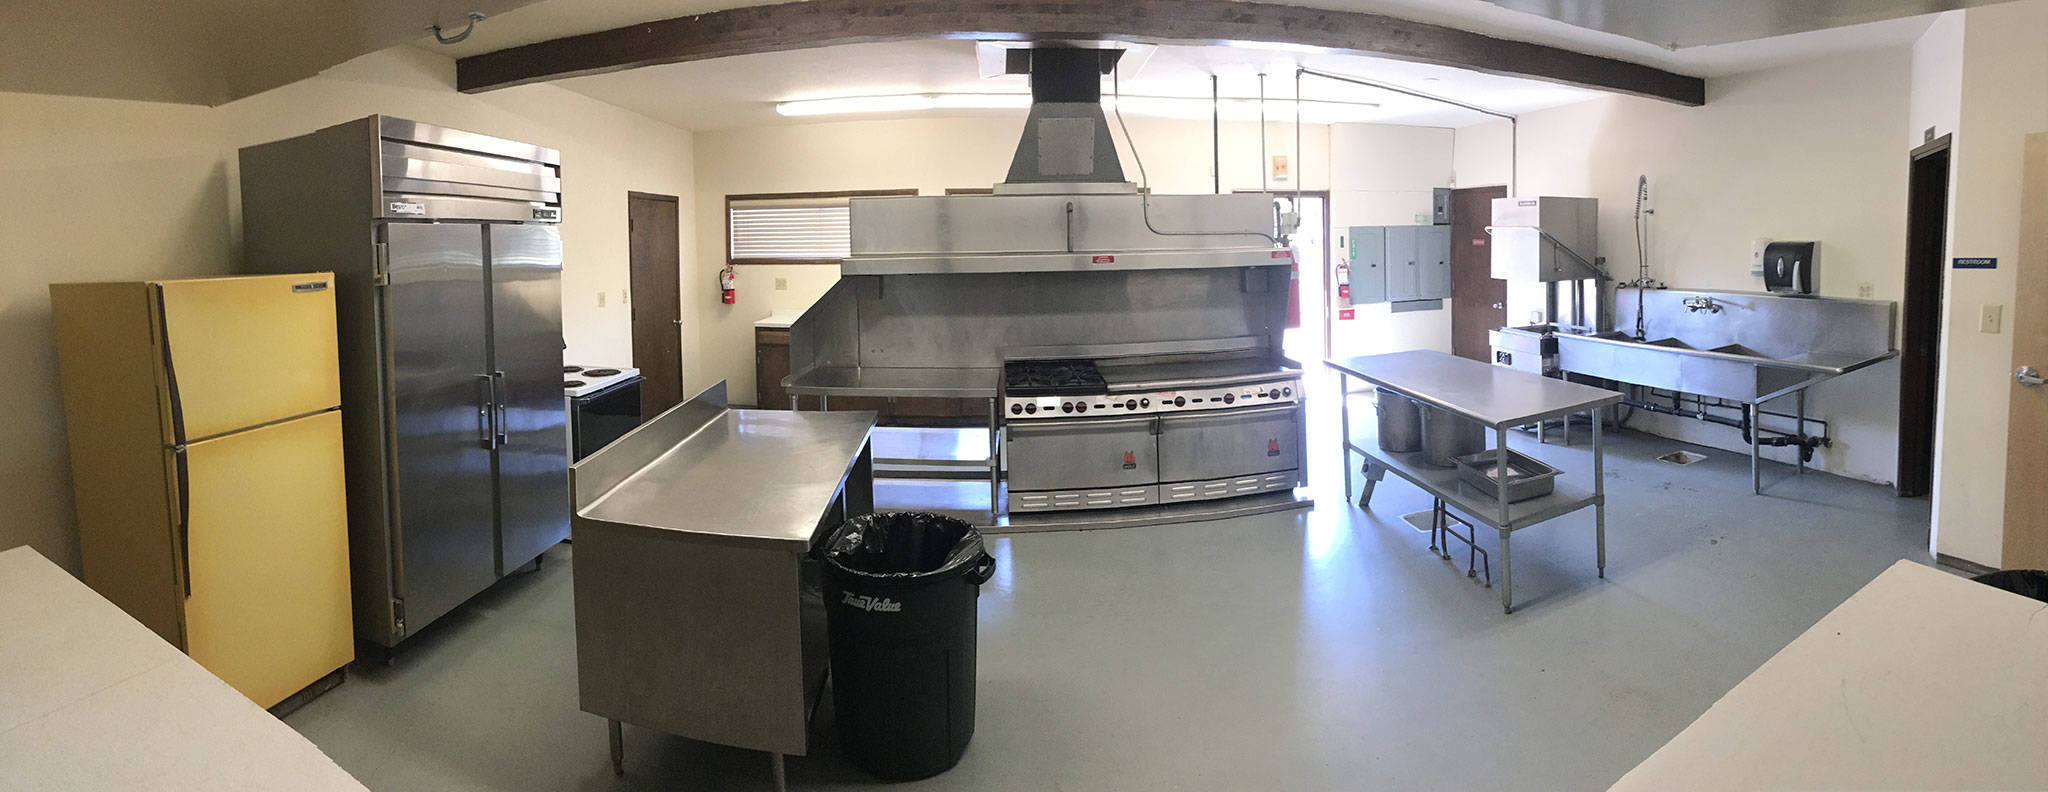 The Guy Cole Convention Center’s kitchen and breakout rooms will see an overhaul later this year after the Sequim City Council approved Monday up to $166,000 in improvements in the spaces. (Matthew Nash/Olympic Peninsula News Group)